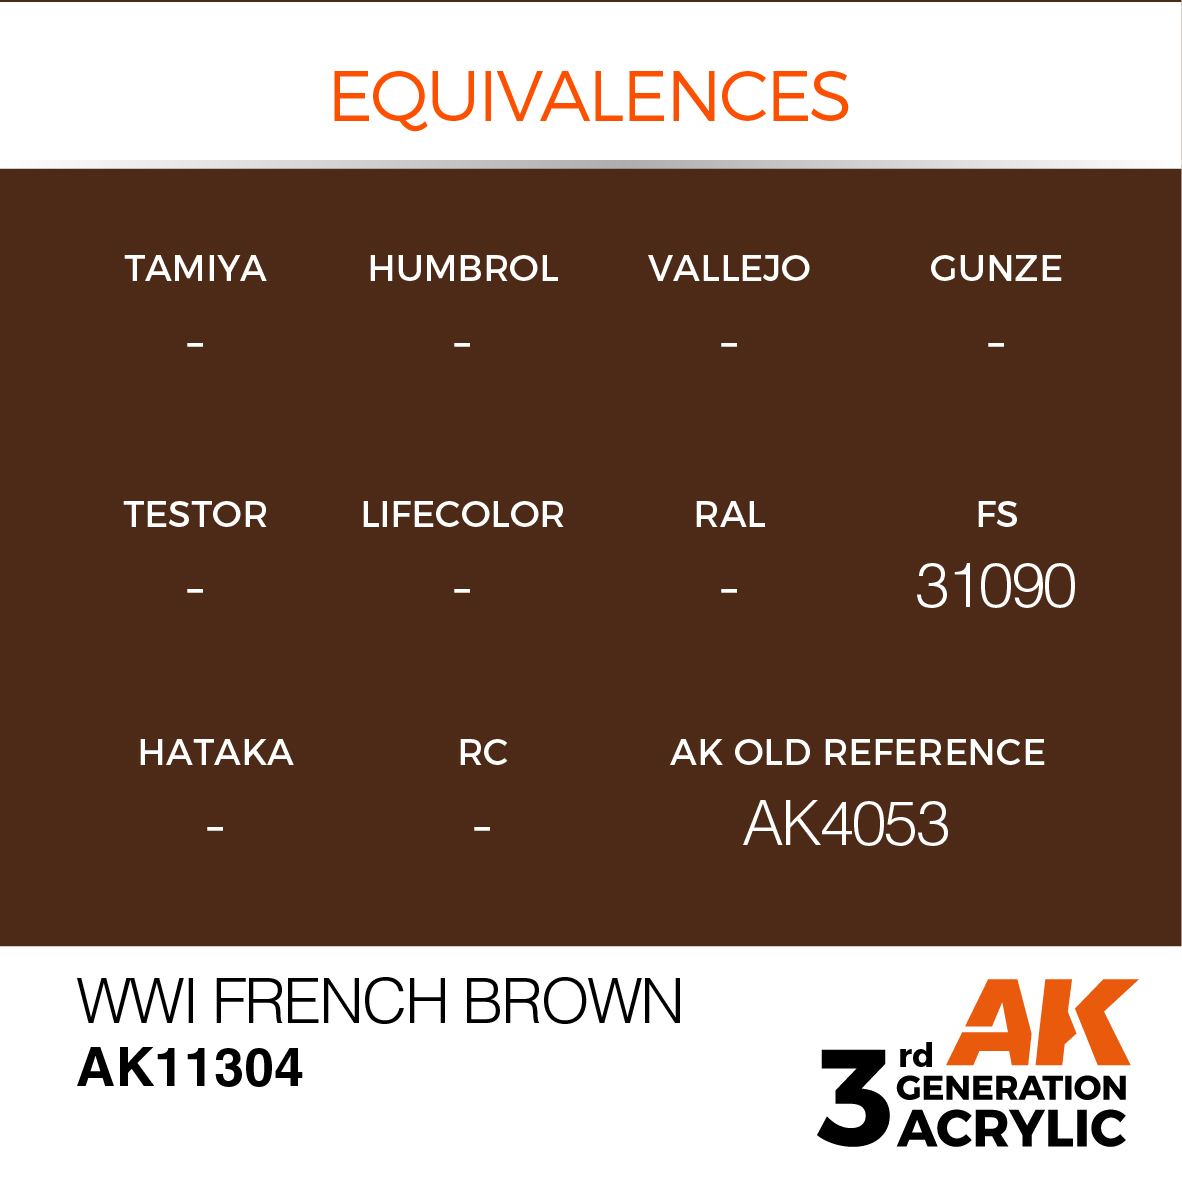 WWI French Brown – AFV